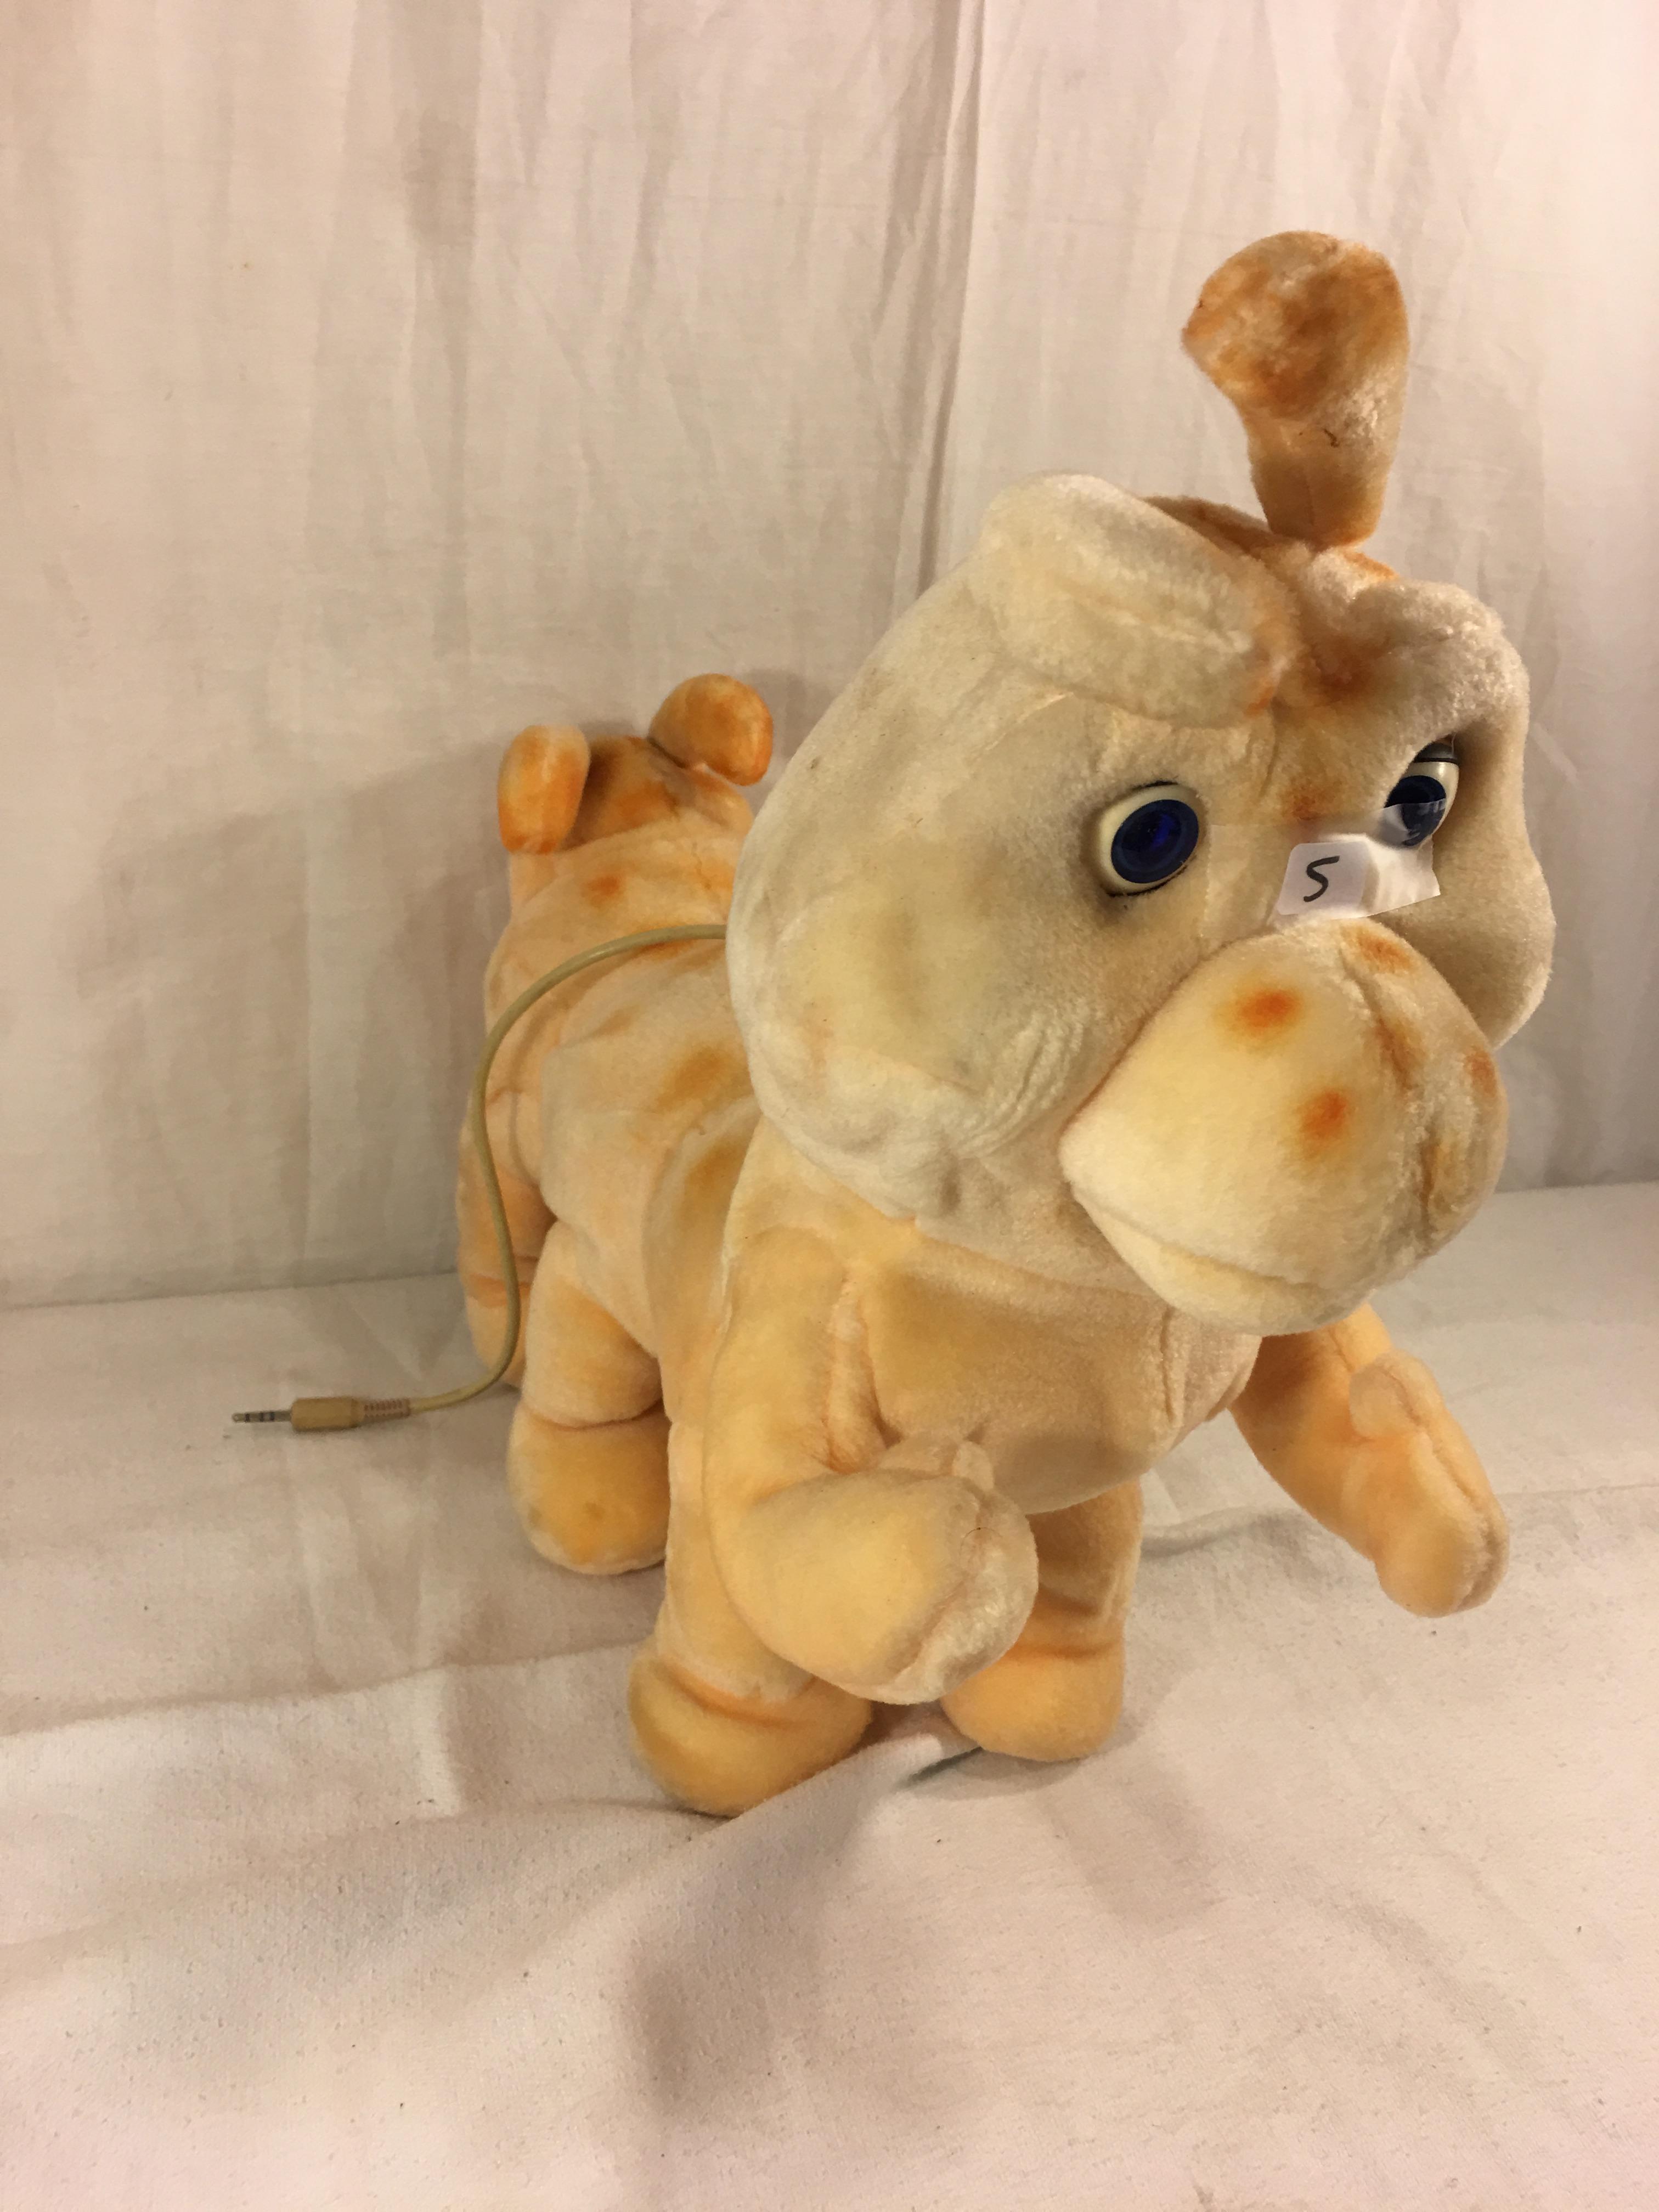 Collector Vintage 1985 Alchemy II World's of Wonder Grubby Animated Talking Stuffed Animal 18" w/ Co